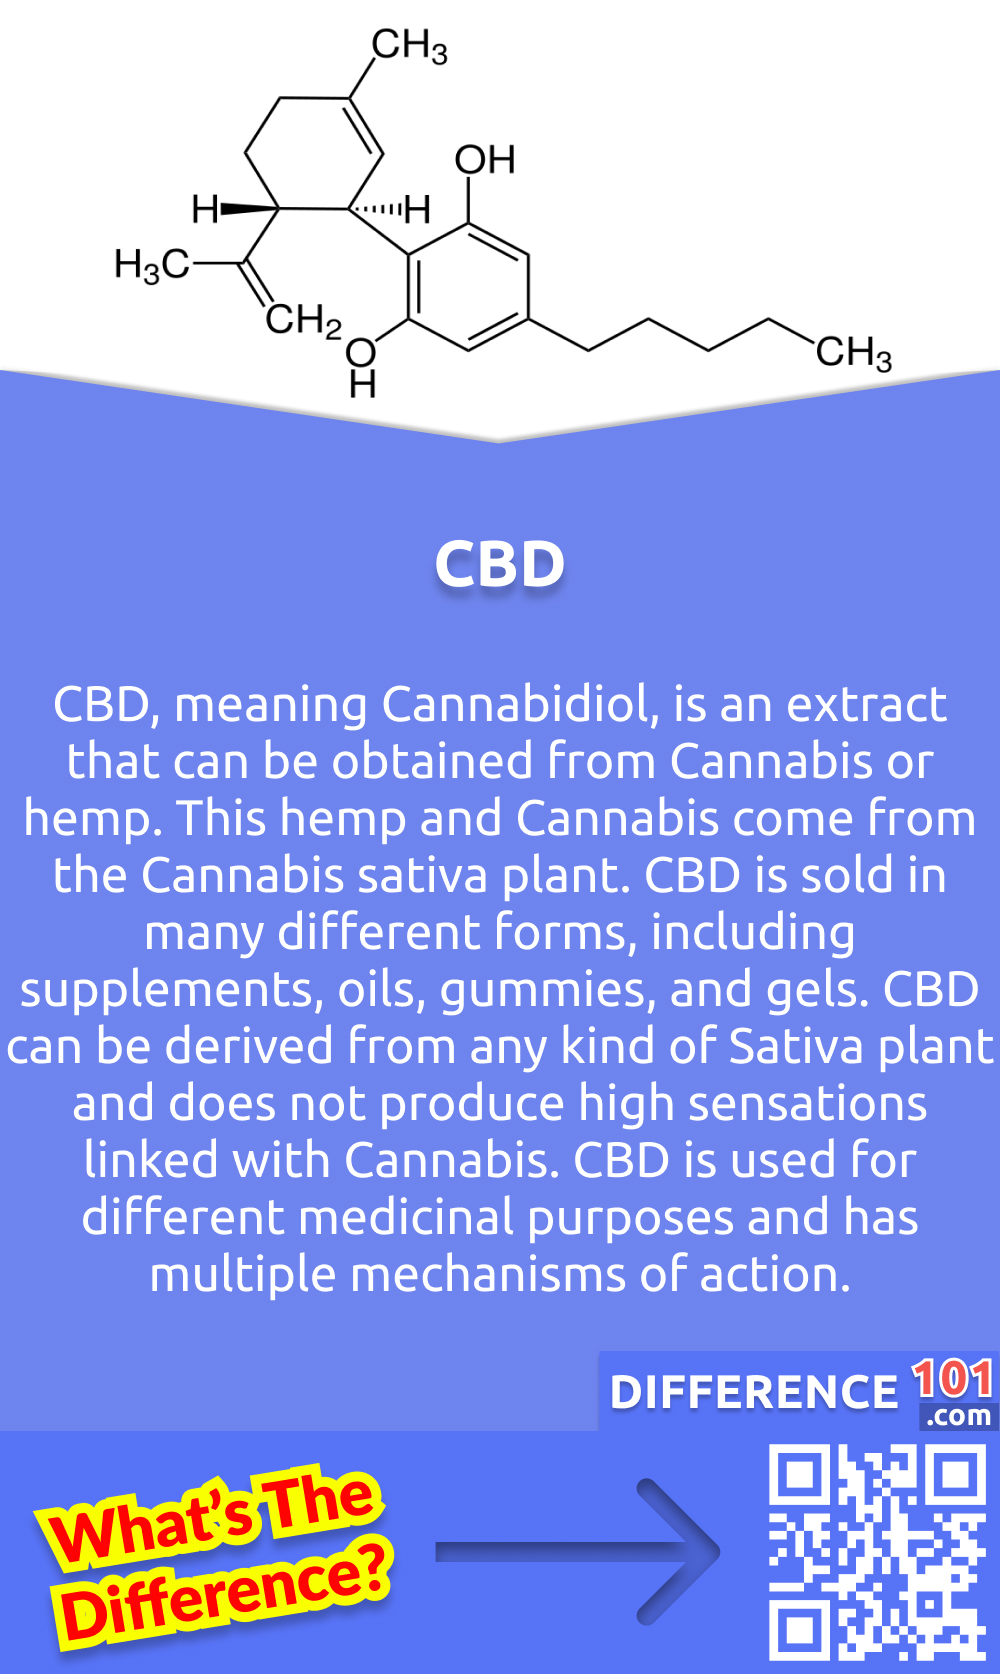 What is CBD? CBD, meaning Cannabidiol, is an extract that can be obtained from Cannabis or hemp. This hemp and Cannabis come from the Cannabis sativa plant. CBD is sold in many different forms, including supplements, oils, gummies, and gels. CBD can be derived from any kind of Sativa plant and does not produce high sensations linked with Cannabis. CBD is used for different medicinal purposes and has multiple mechanisms of action. It has been found to have an antiepileptic effect and helps reduce pain and inflammation. CBD is also considered to be decreasing psychotic symptoms, neuropathic pain, and anxiety symptoms. As it has an antidepressant effect.